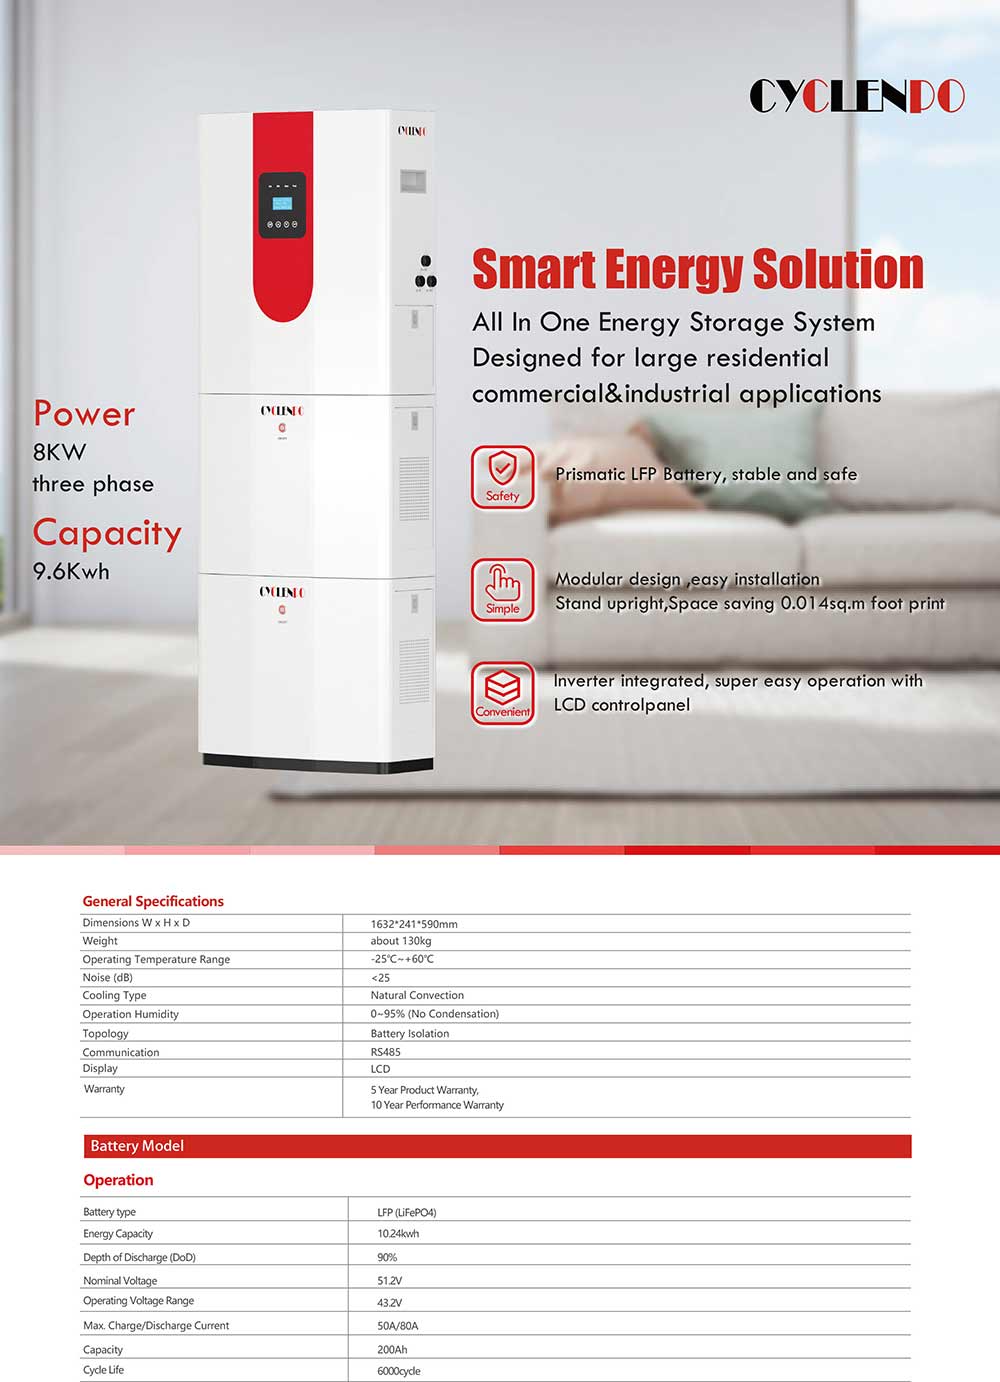 All-in-one residential energy storage system